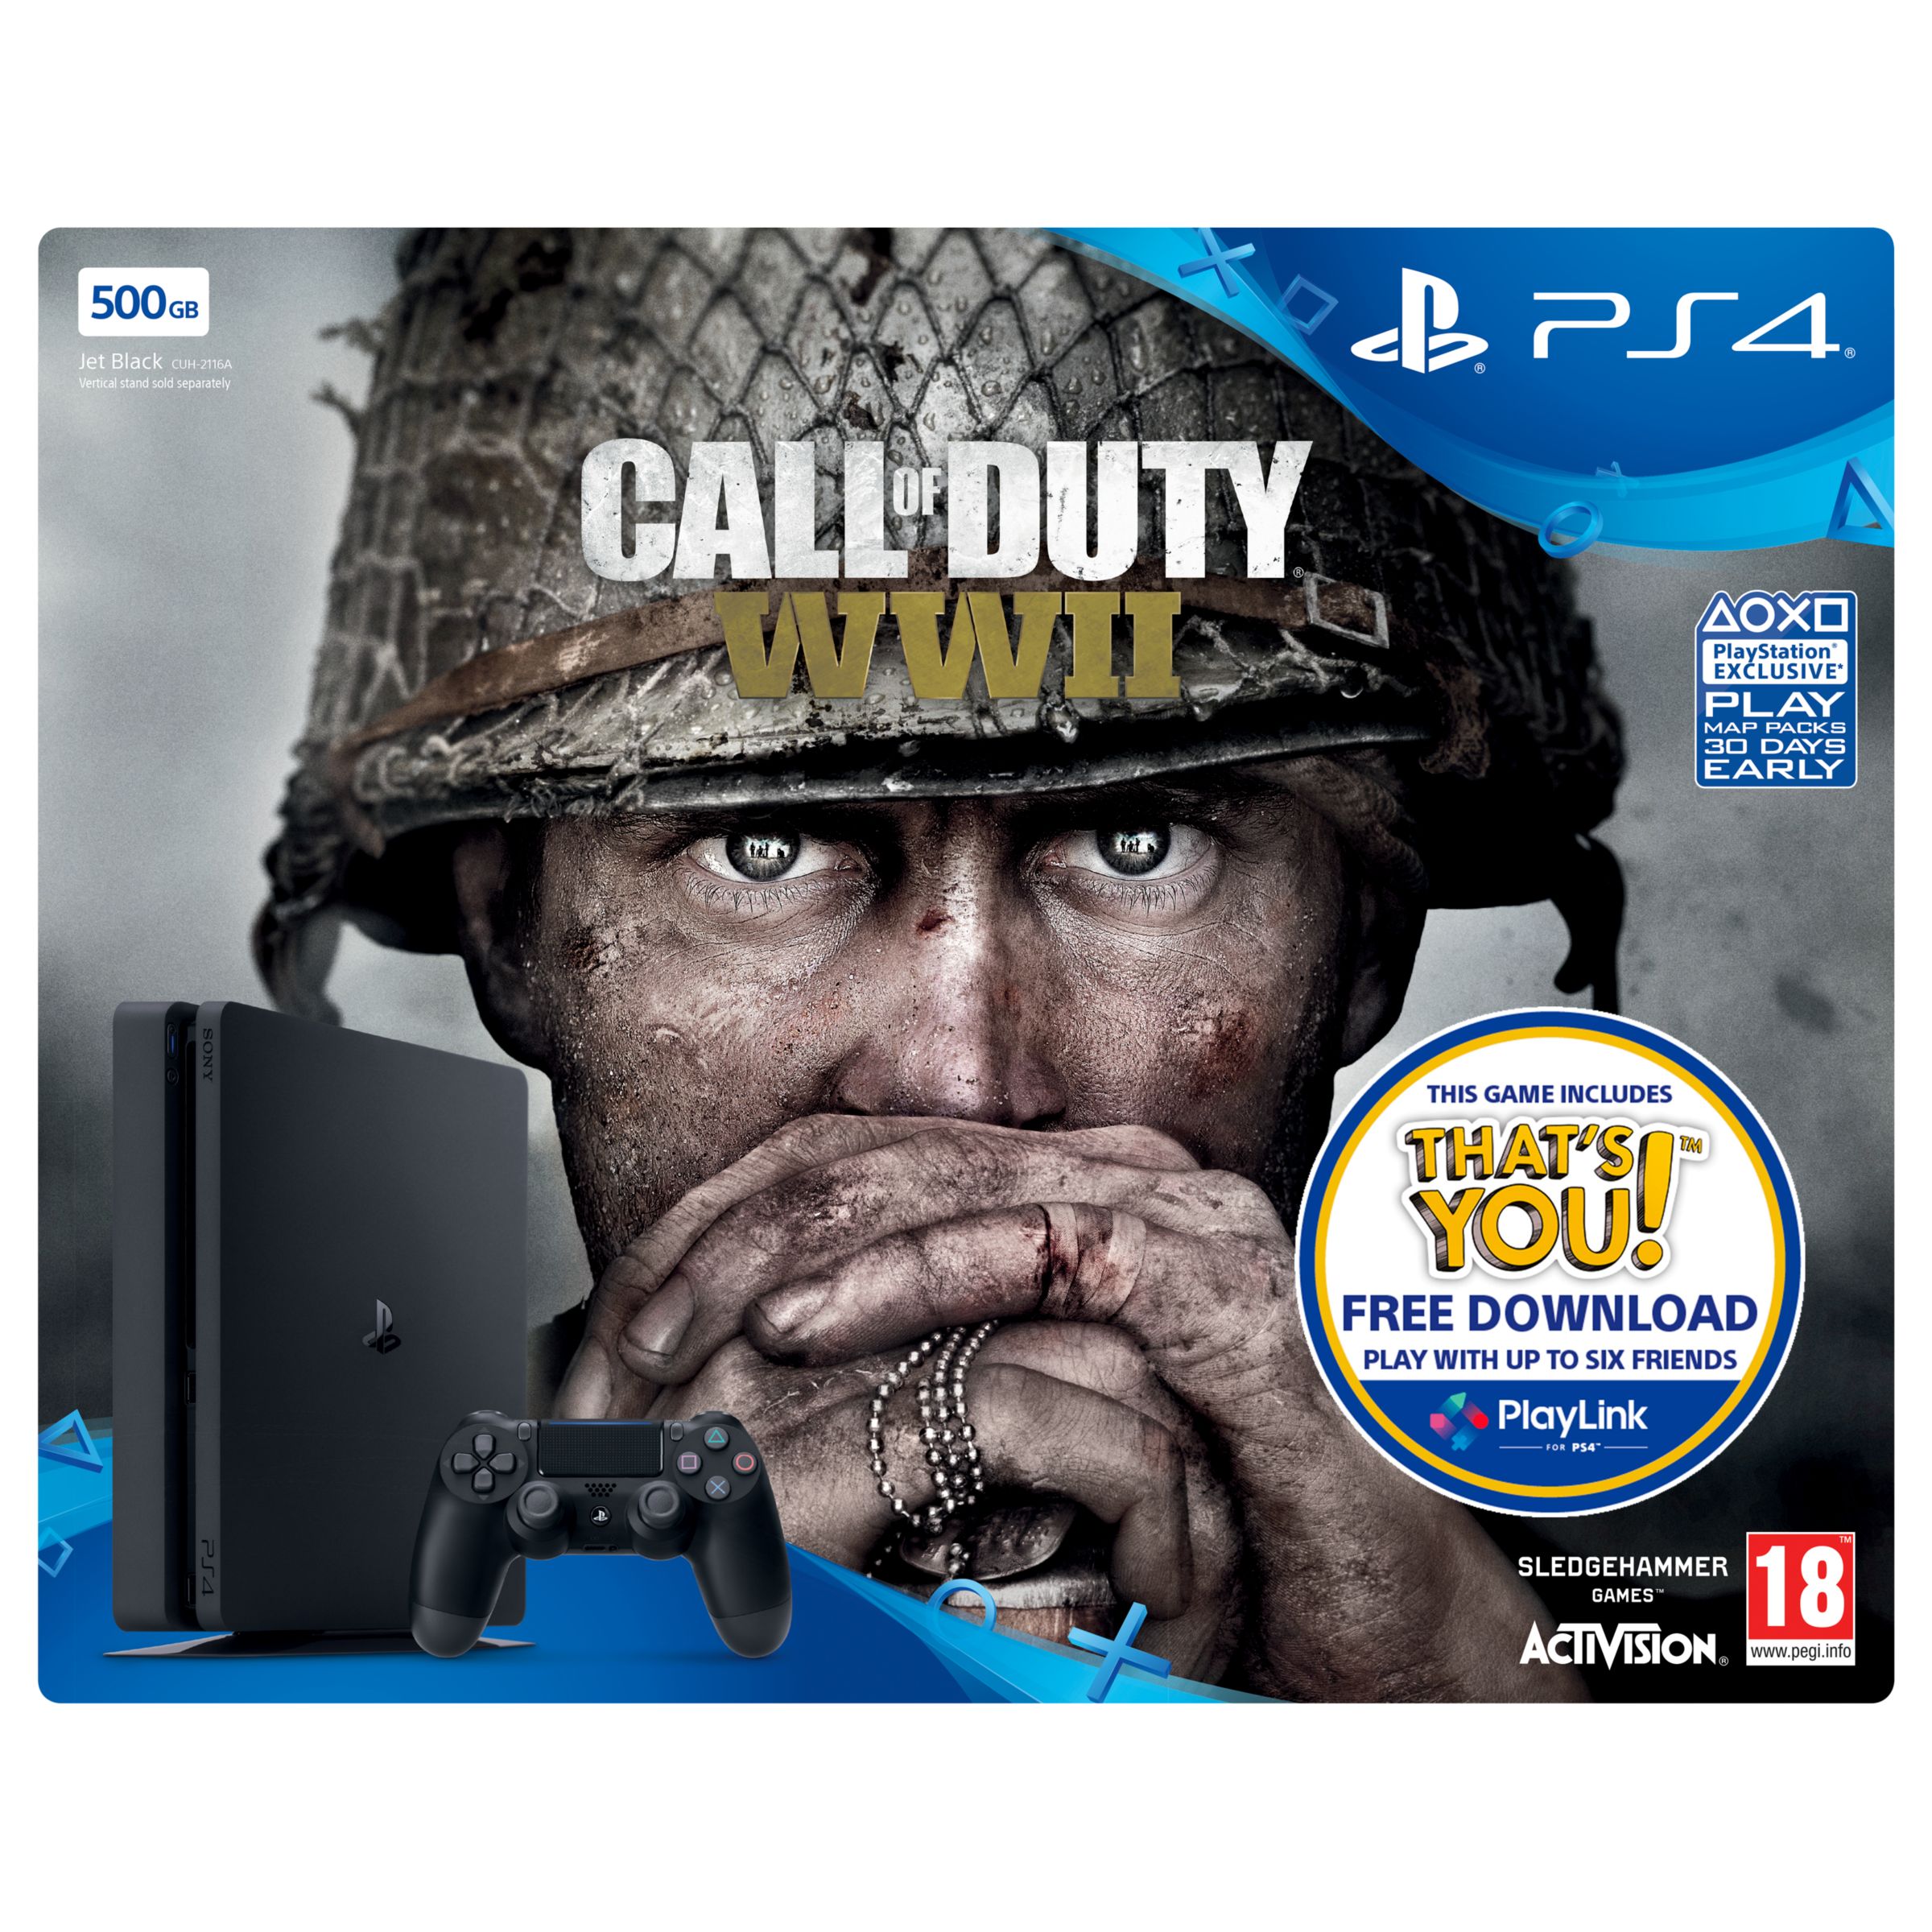 Sony PlayStation Slim Console, 500GB, DualShock Controller and Call of  Duty: WWII game, with free That's You! game download code